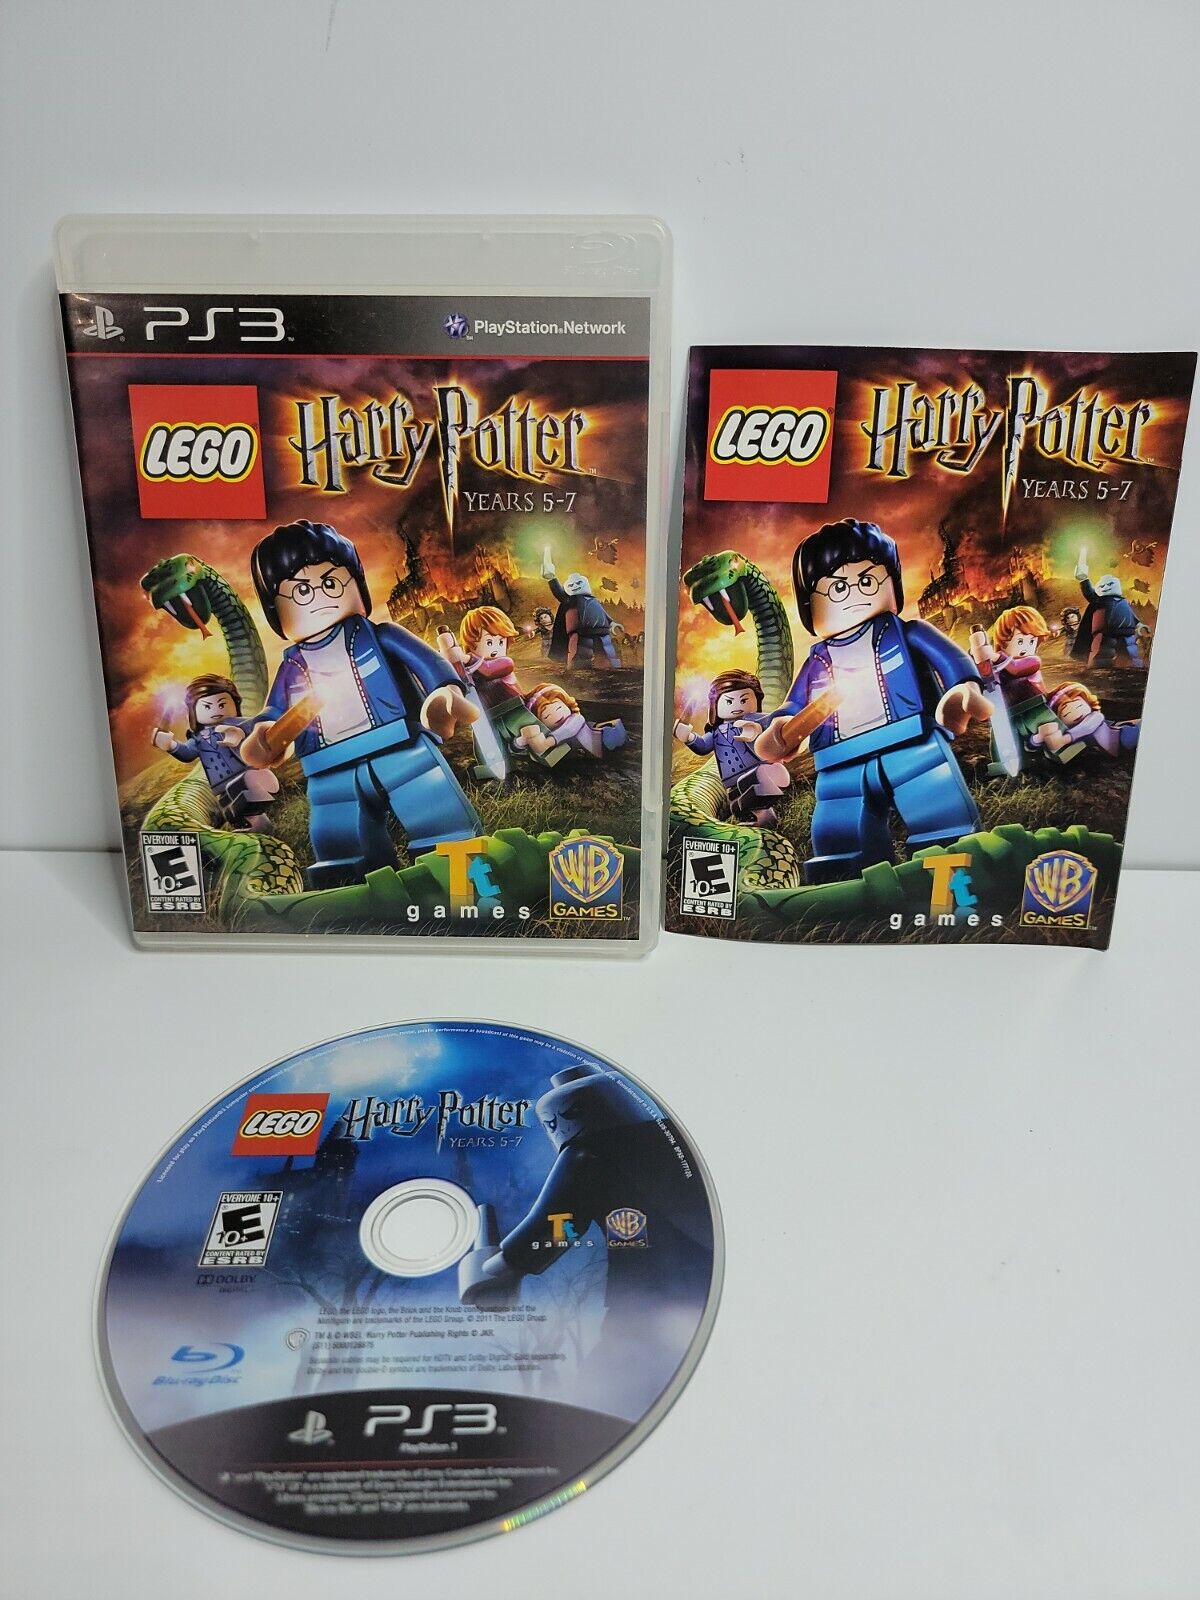 Franje transmissie Bully LEGO Harry Potter: Years 5-7 (Sony PlayStation 3 PS3) *COMPLETE - TESTED*  883929187850 | eBay